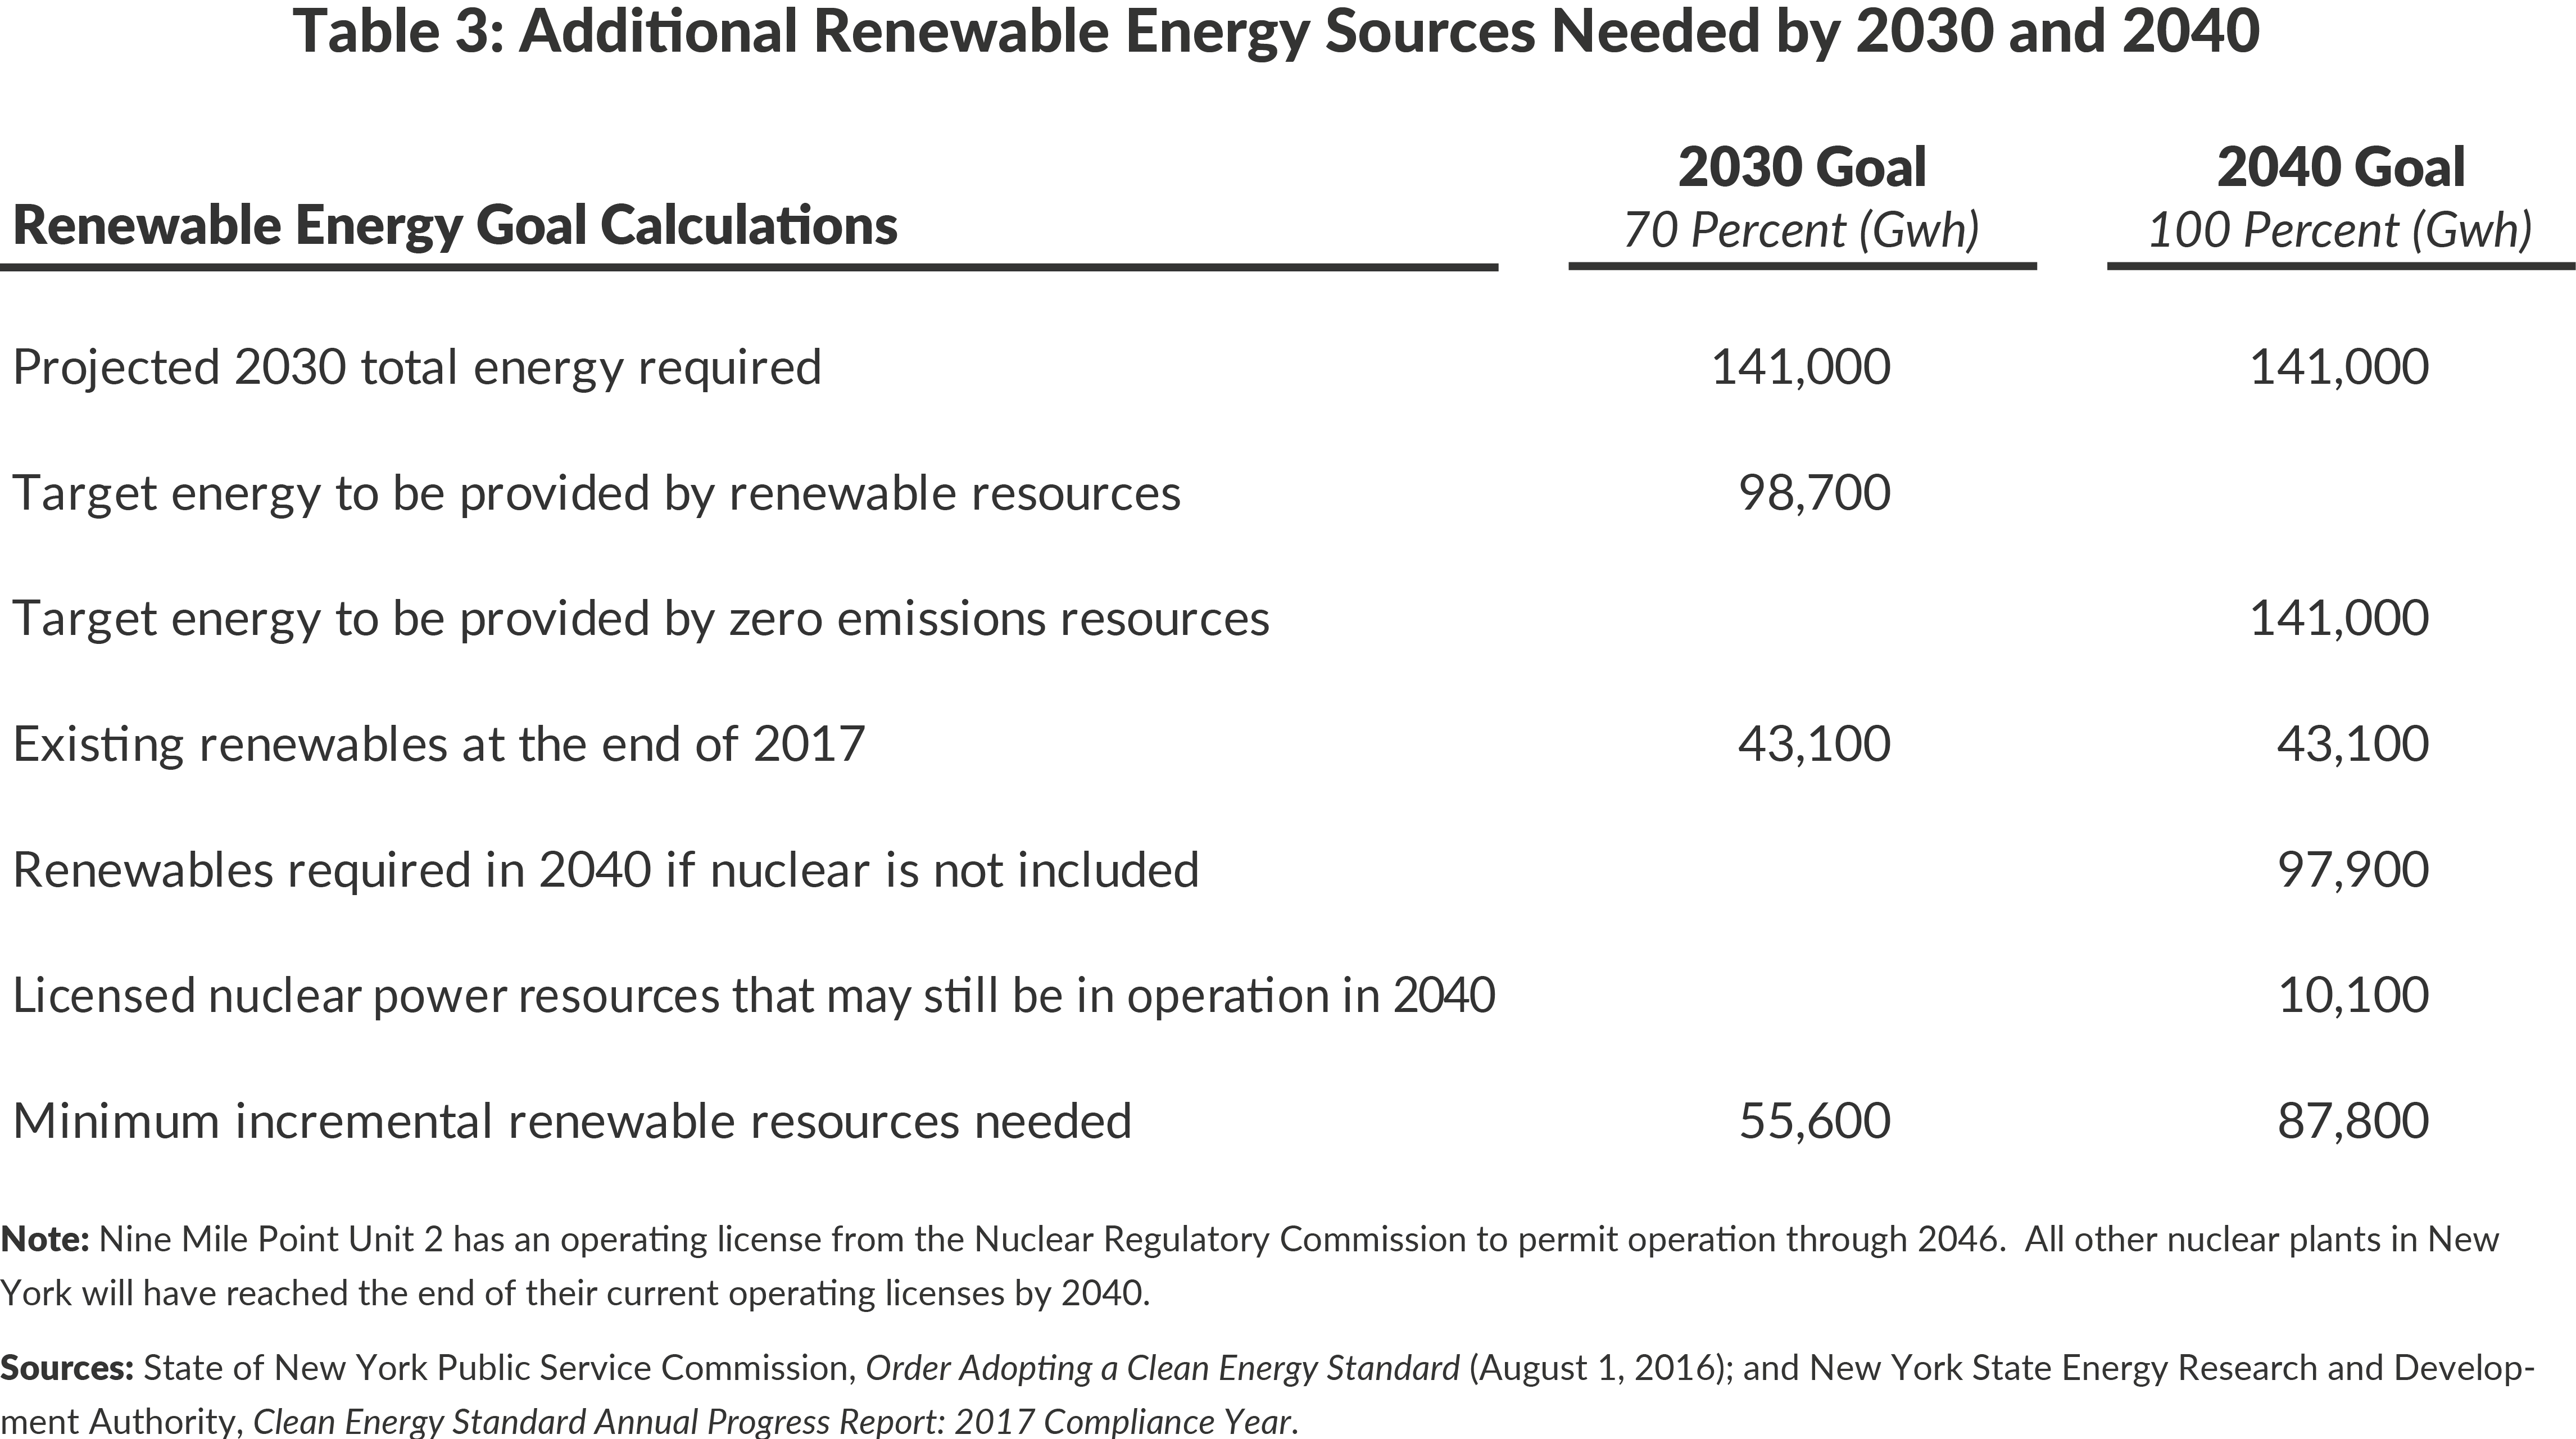 Table 3: Additional Renewable Energy Sources Needed by 2030 and 2040